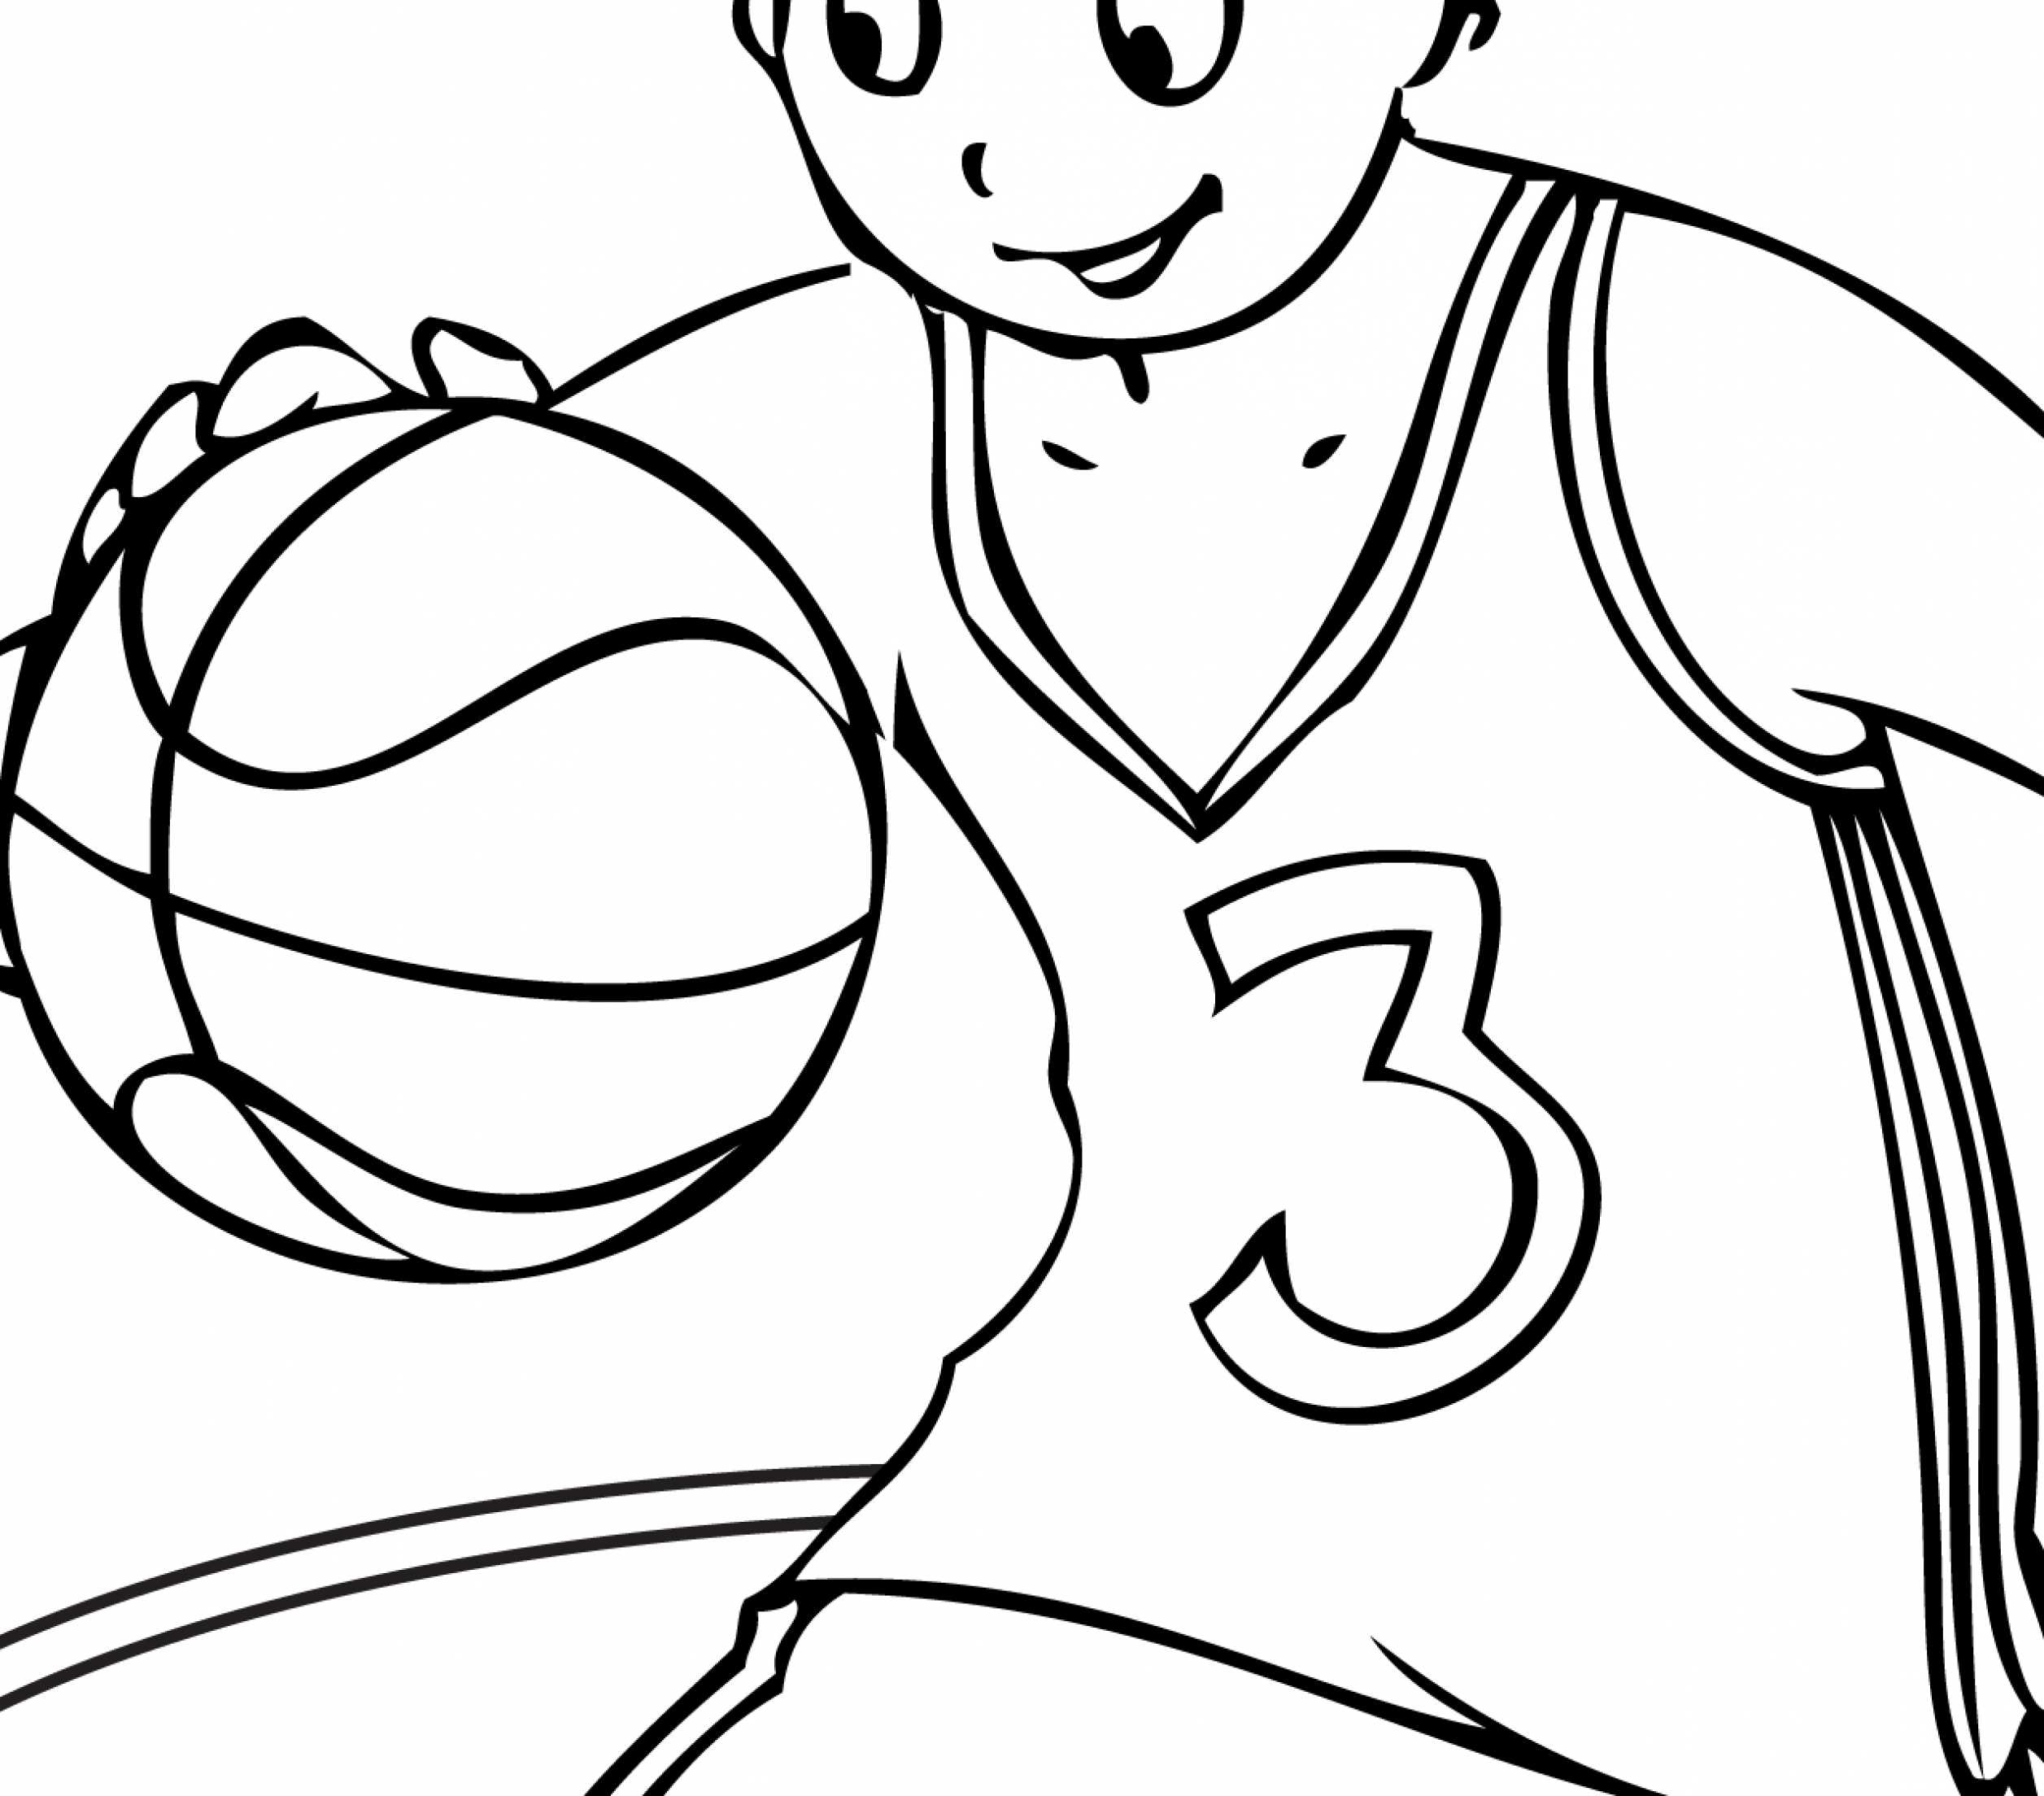 Sports Coloring Book Pages Coloring Ideas Sports Coloring Pages For Kidsry Sheets Picture